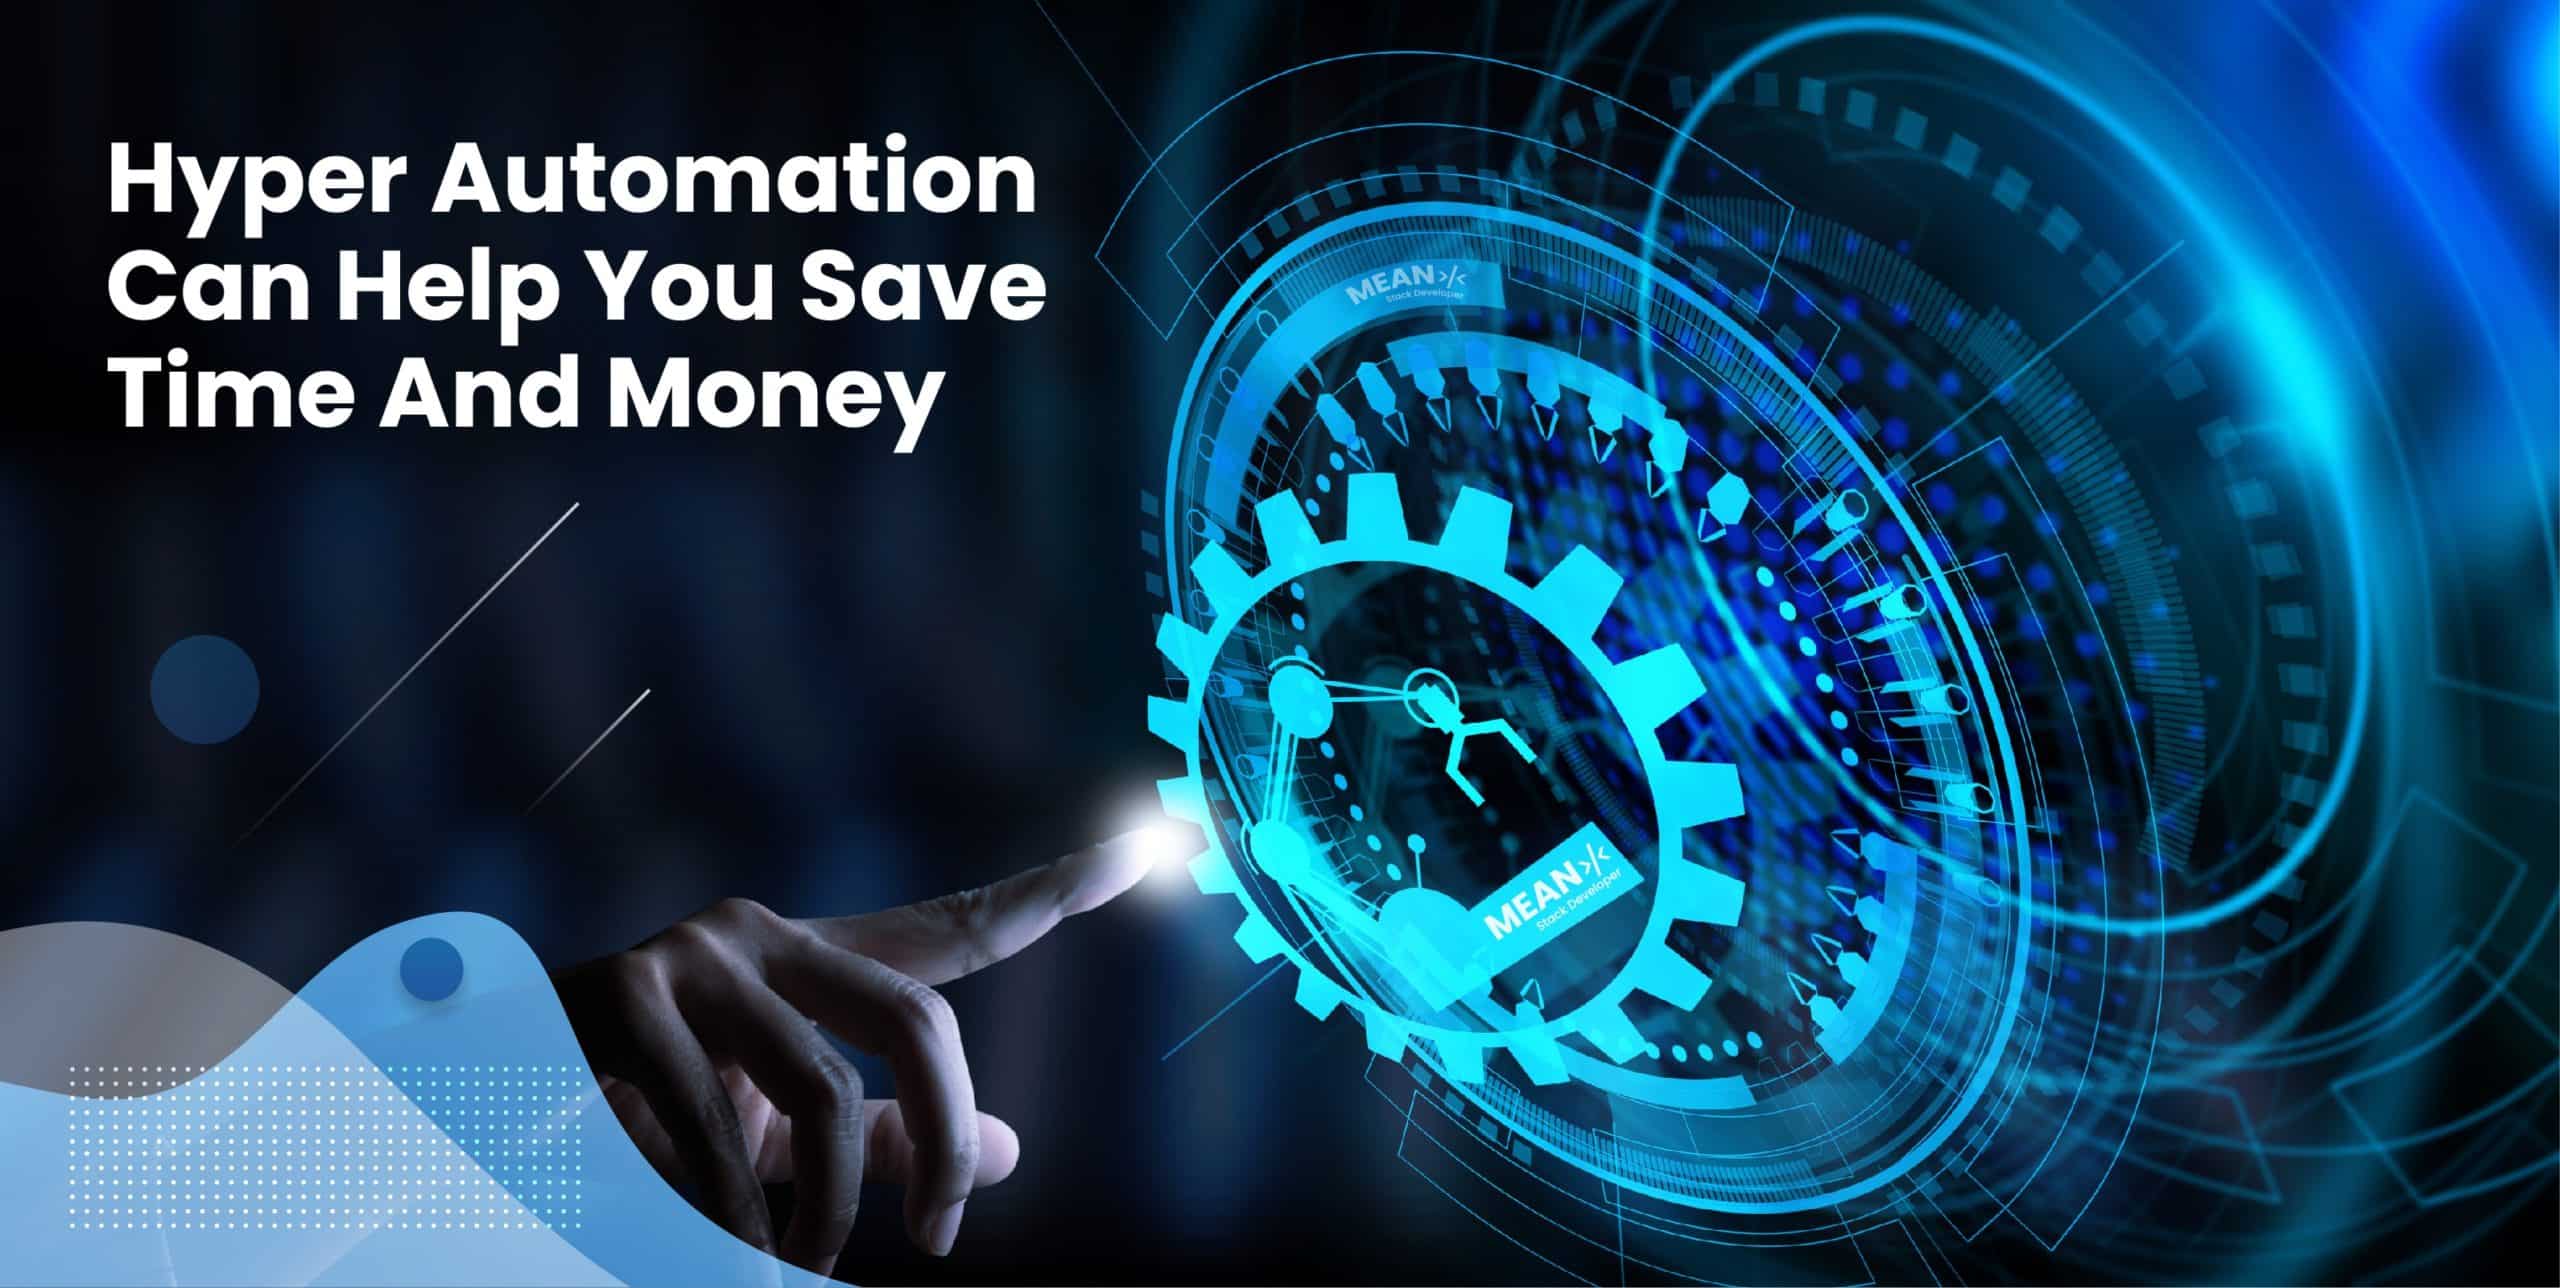 Hyper Automation Can Help You Save Time And Money